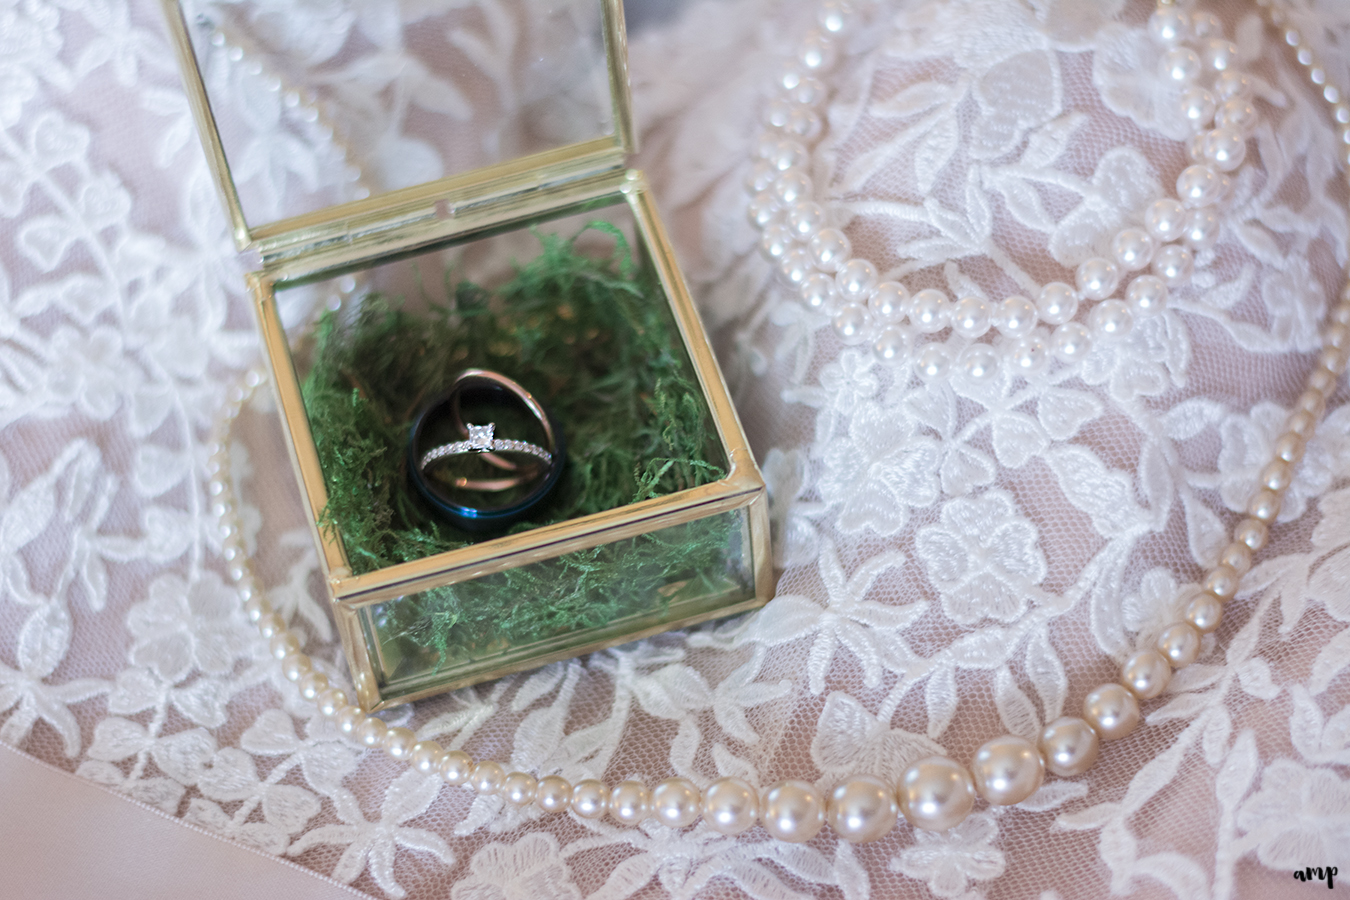 Wedding rings in antique gold and glass ring box atop lacy wedding dress and pearls